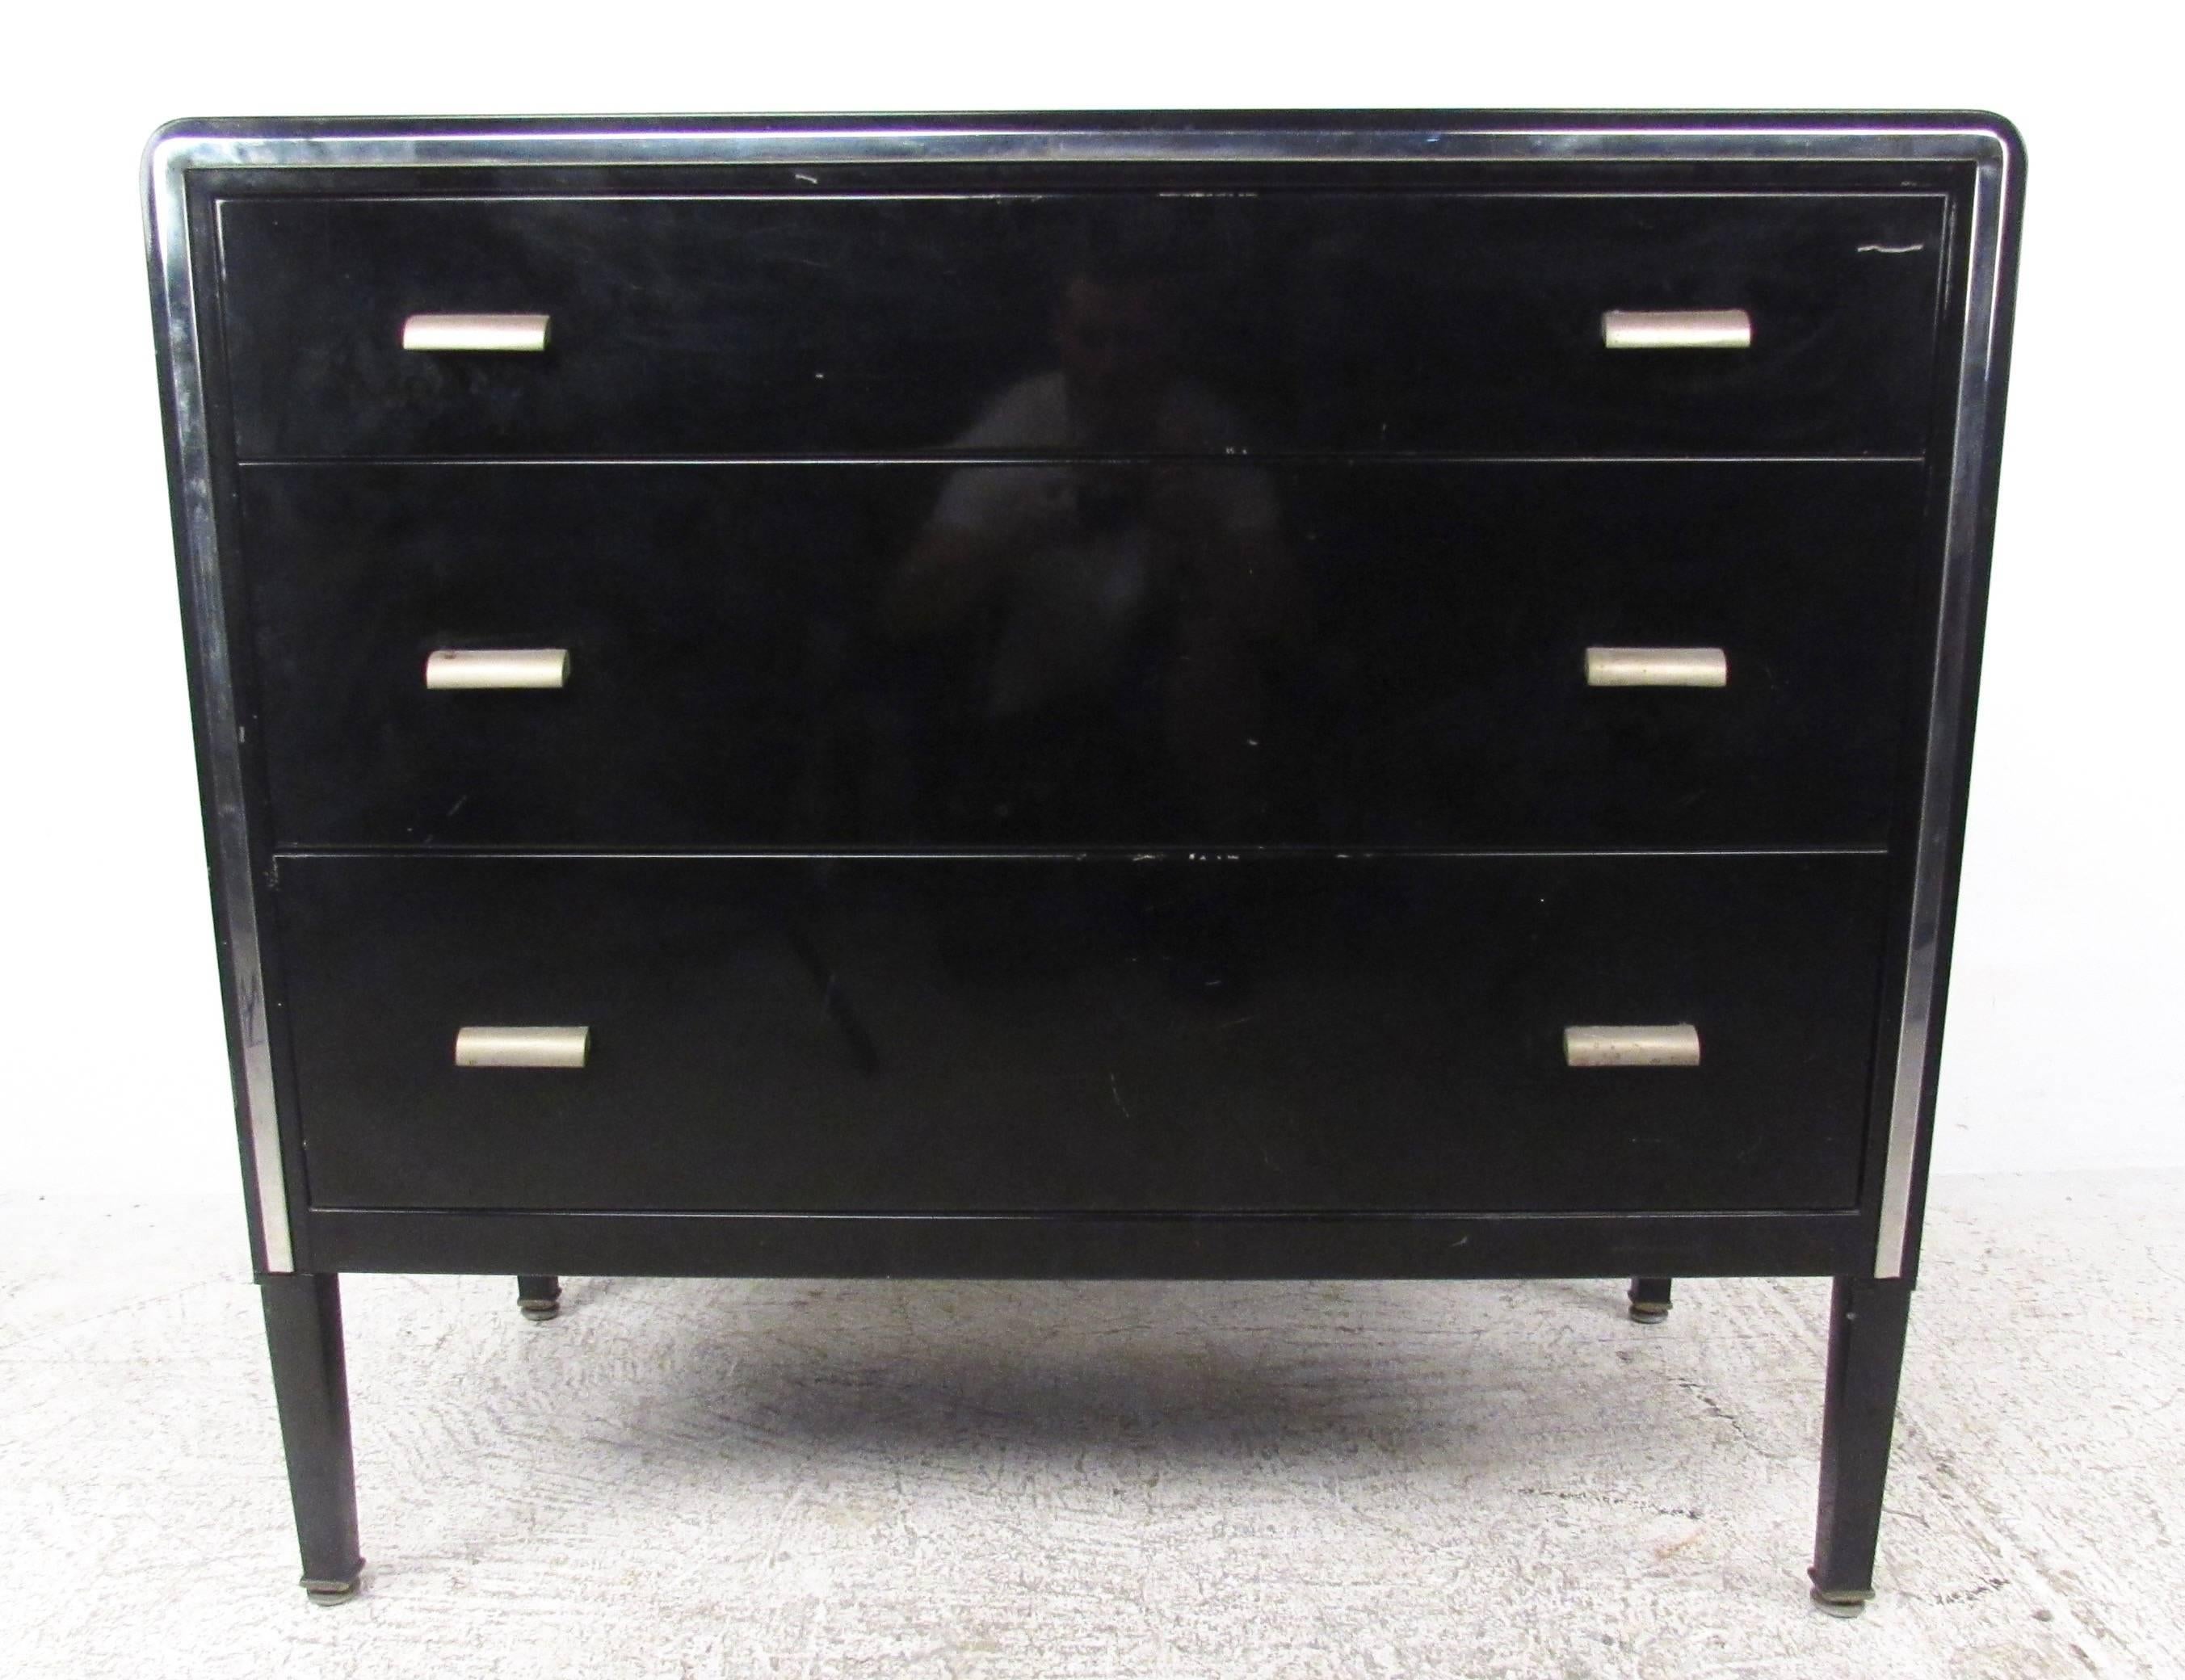 This vintage metal dresser with matching end tables by Simmons Furniture make a lovely Mid-Century addition to any interior. Spacious drawers for storage and sleek black lacquer finish set this Industrial metal pair apart from others of the era.